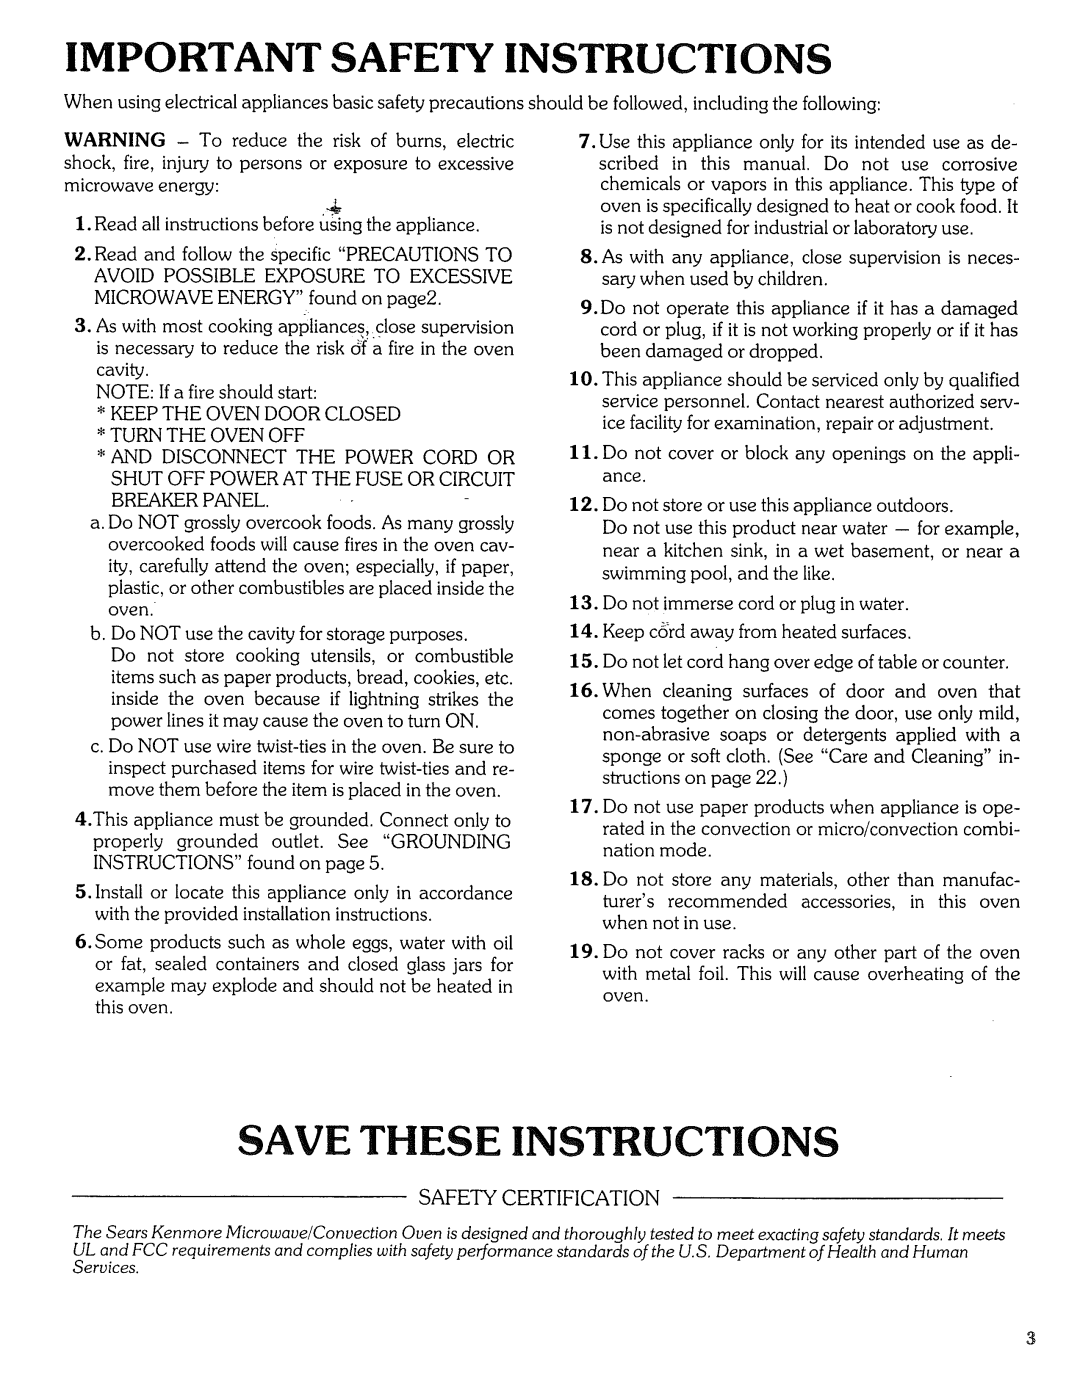 Sears Microwave Oven manual Important Safety Instructions, Save These Instructions, Safety Certification 